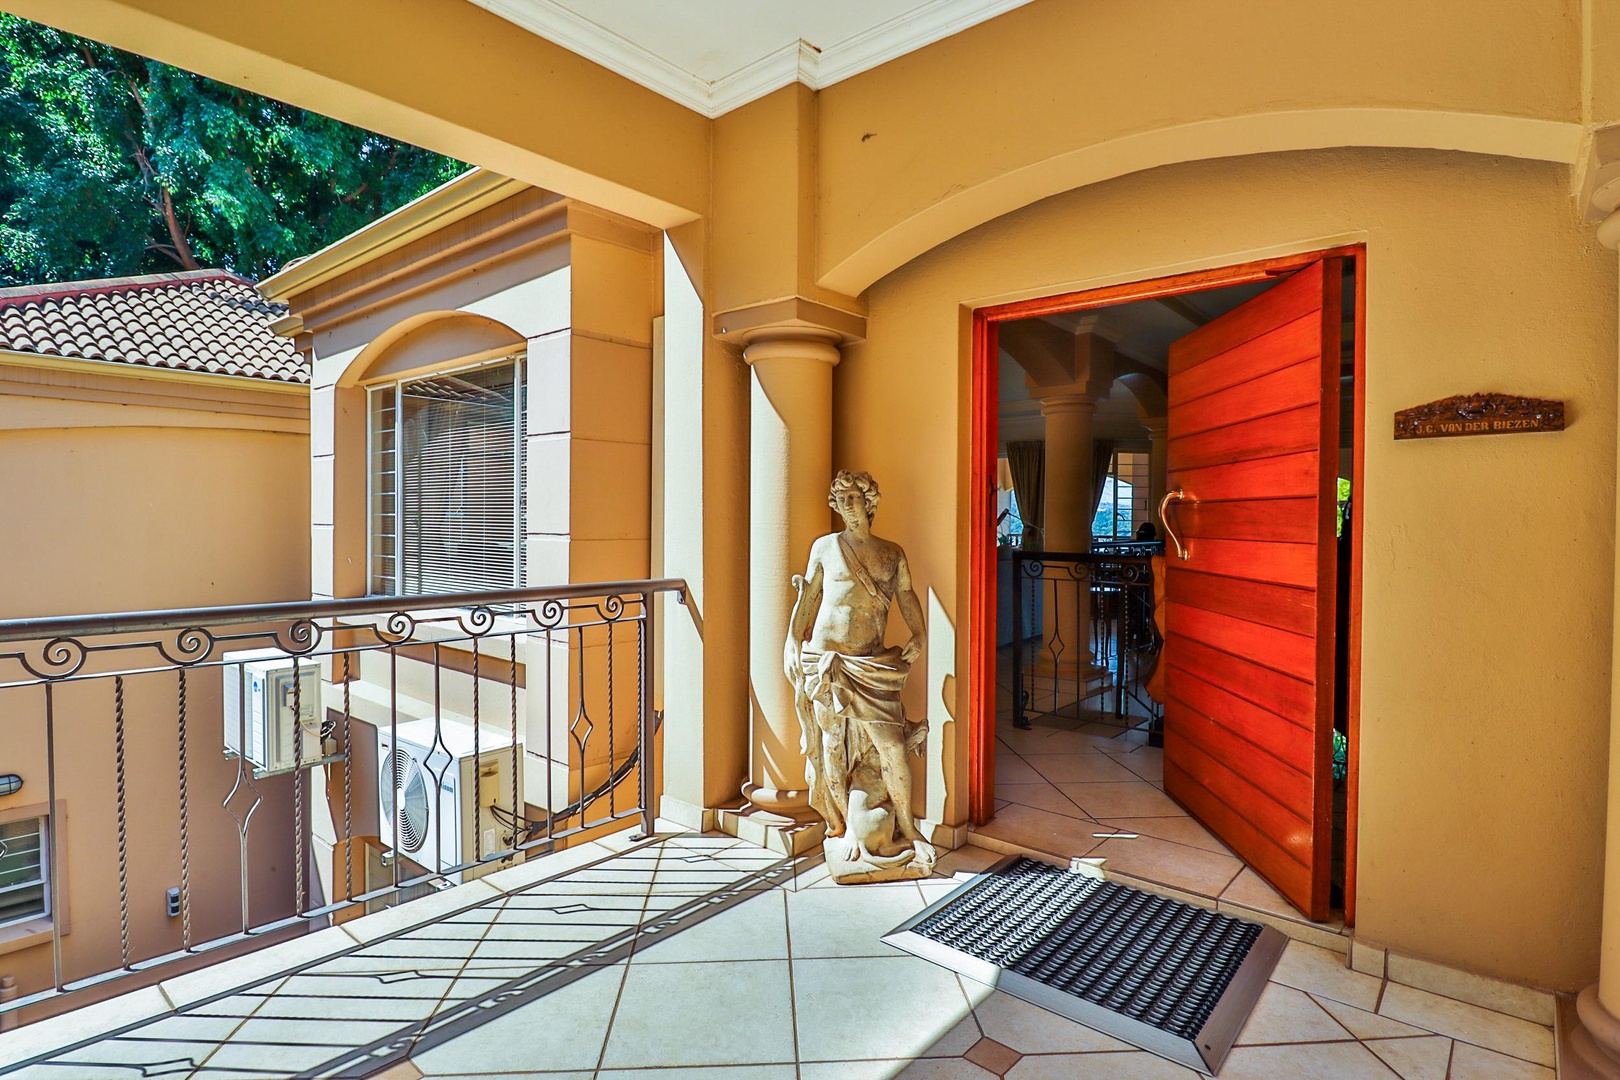 House in Kosmos - Welcoming portico with large wooden door leading into the lounge